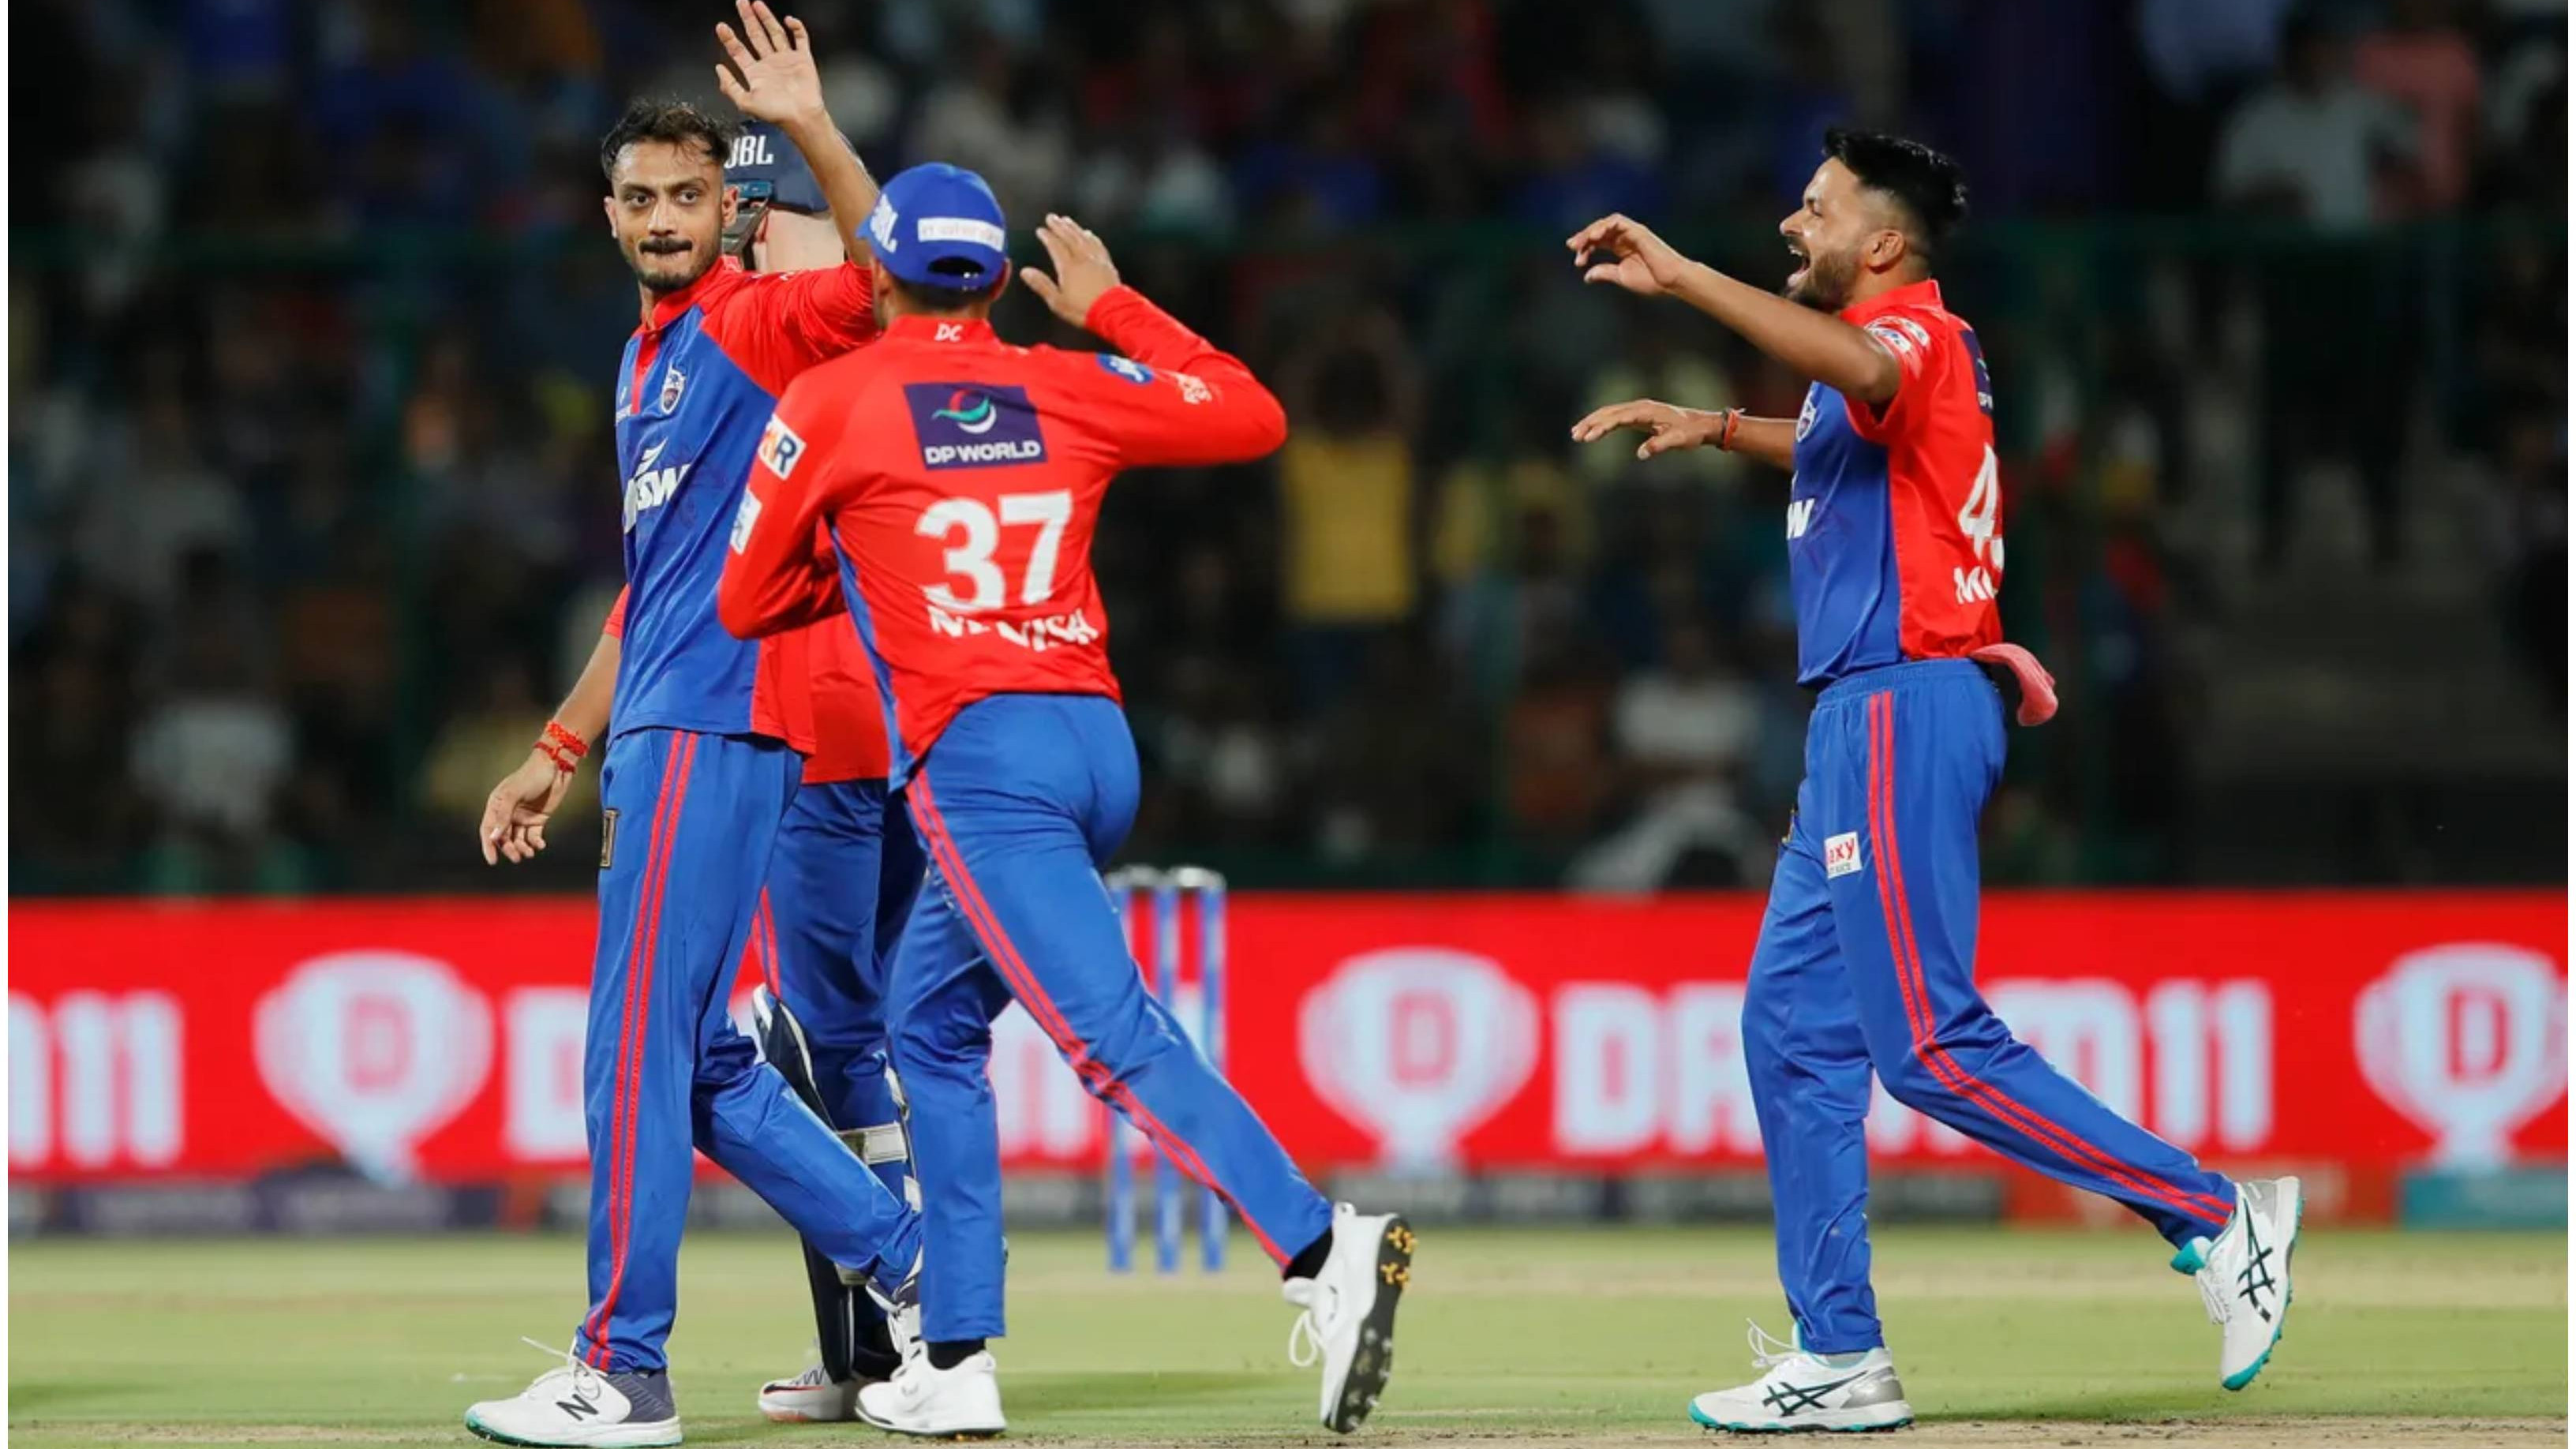 IPL 2023: “Our win in the last match will help us build confidence,” says Akshar Patel ahead of DC’s clash against SRH